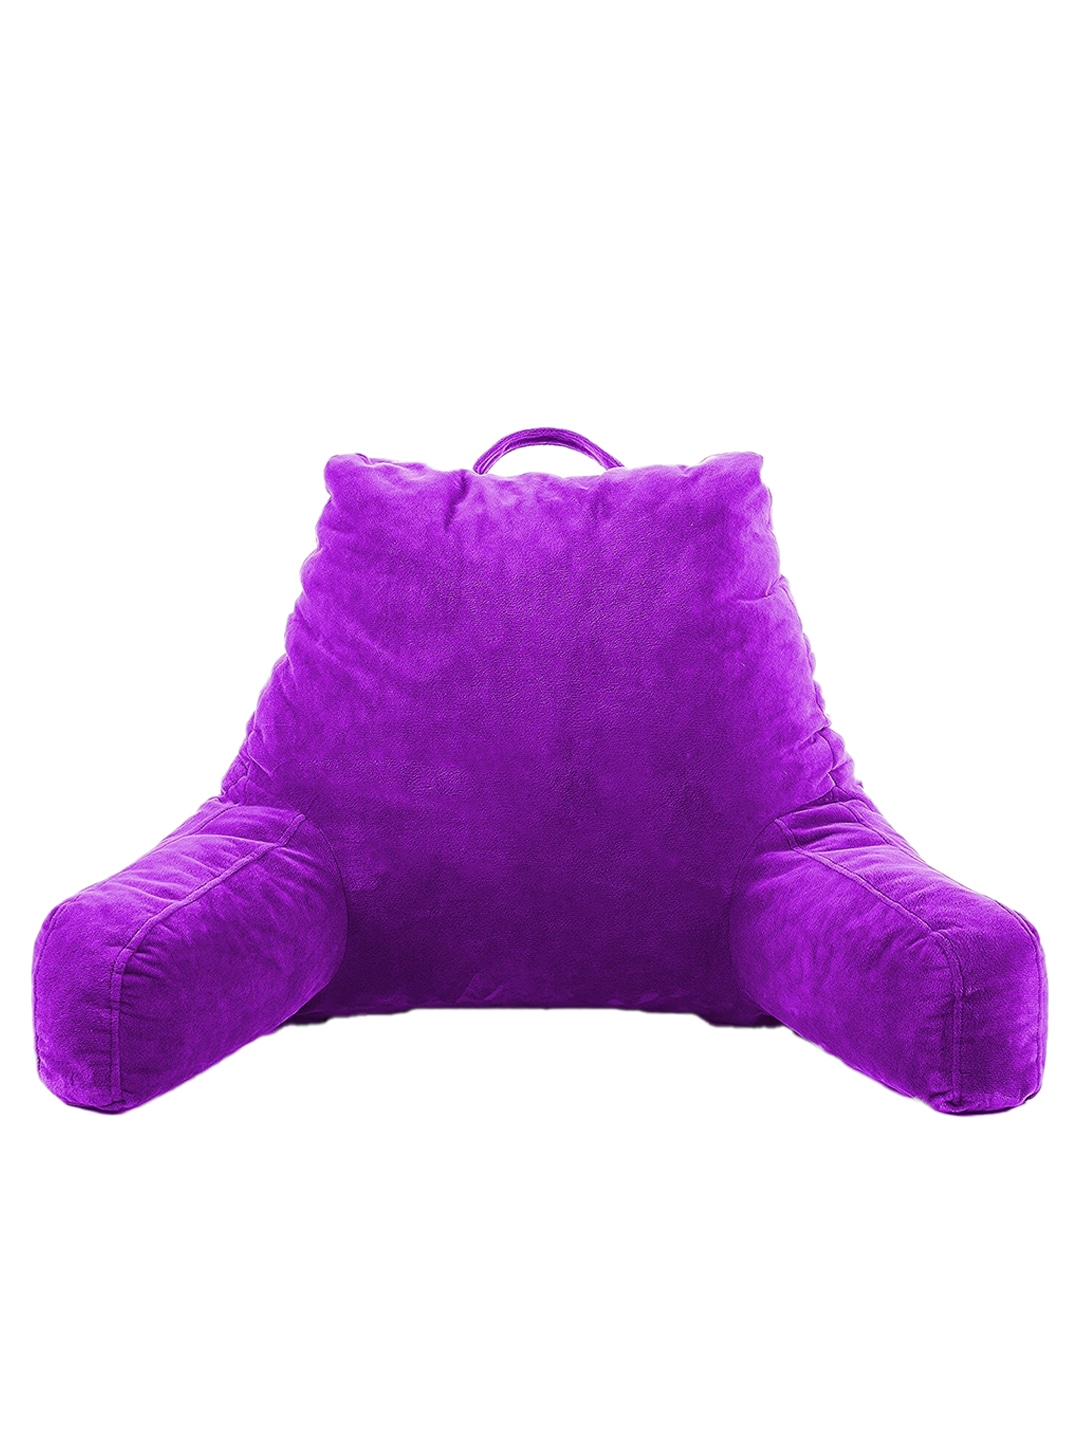 Pum Pum Purple Solid Back Rest Reading Pillow Price in India